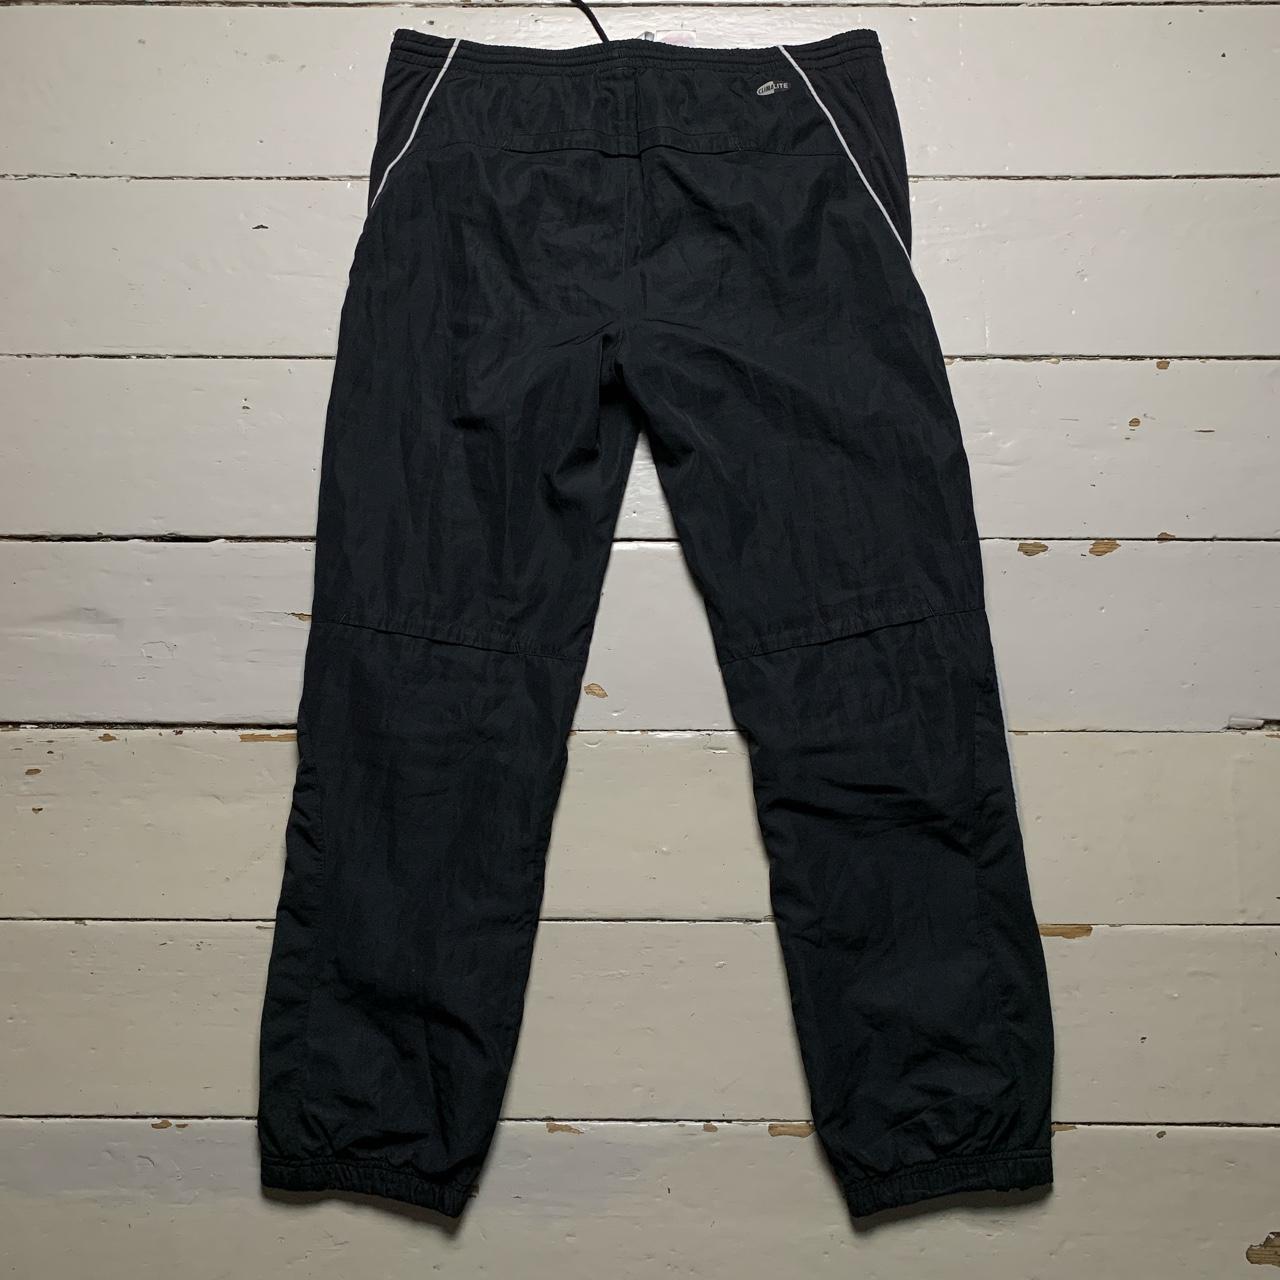 Adidas Climalite Vintage Baggy Black and White Shell Track Pant Bottom ...